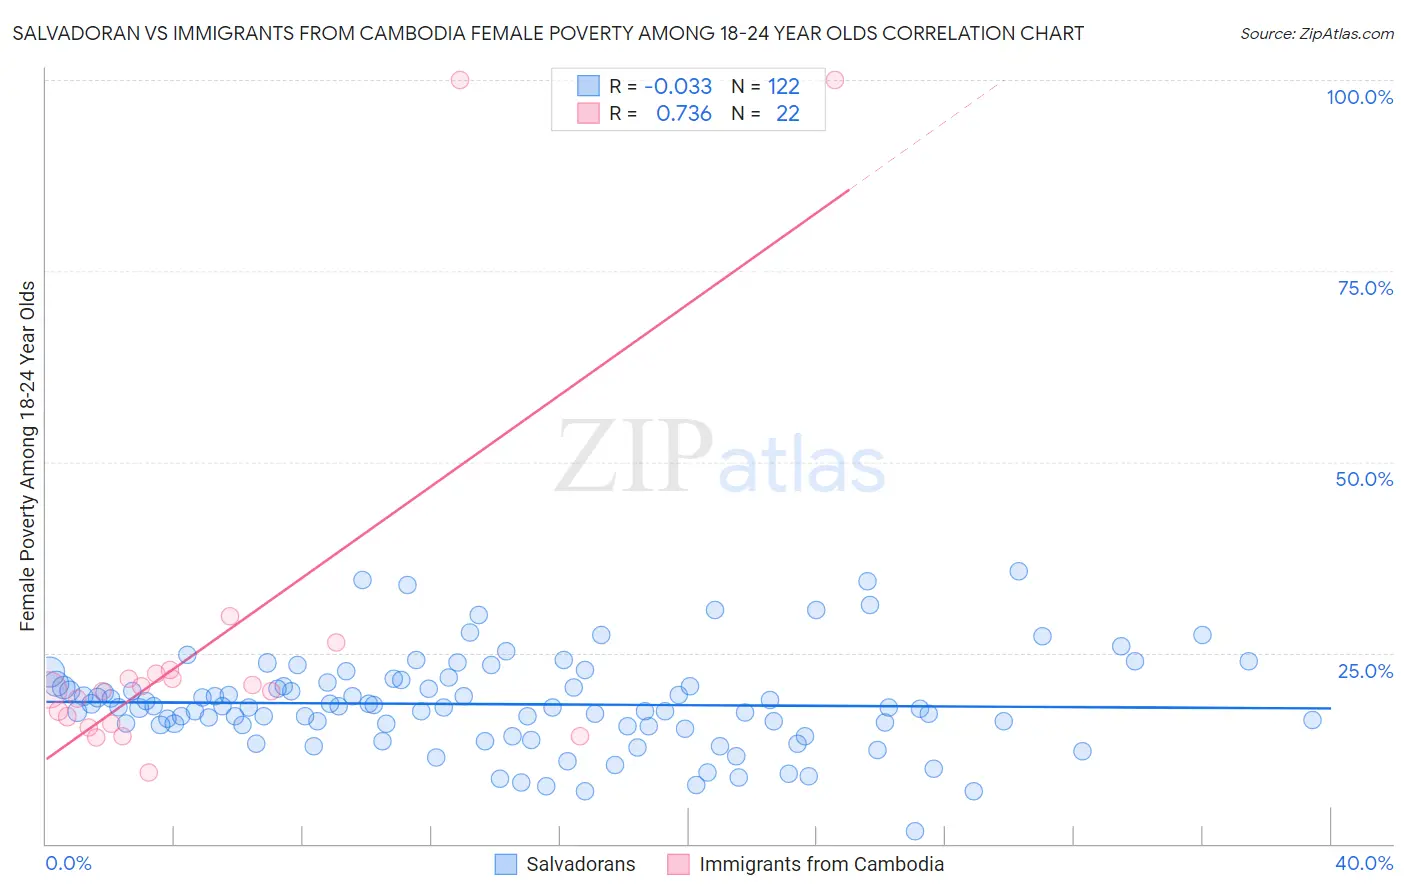 Salvadoran vs Immigrants from Cambodia Female Poverty Among 18-24 Year Olds